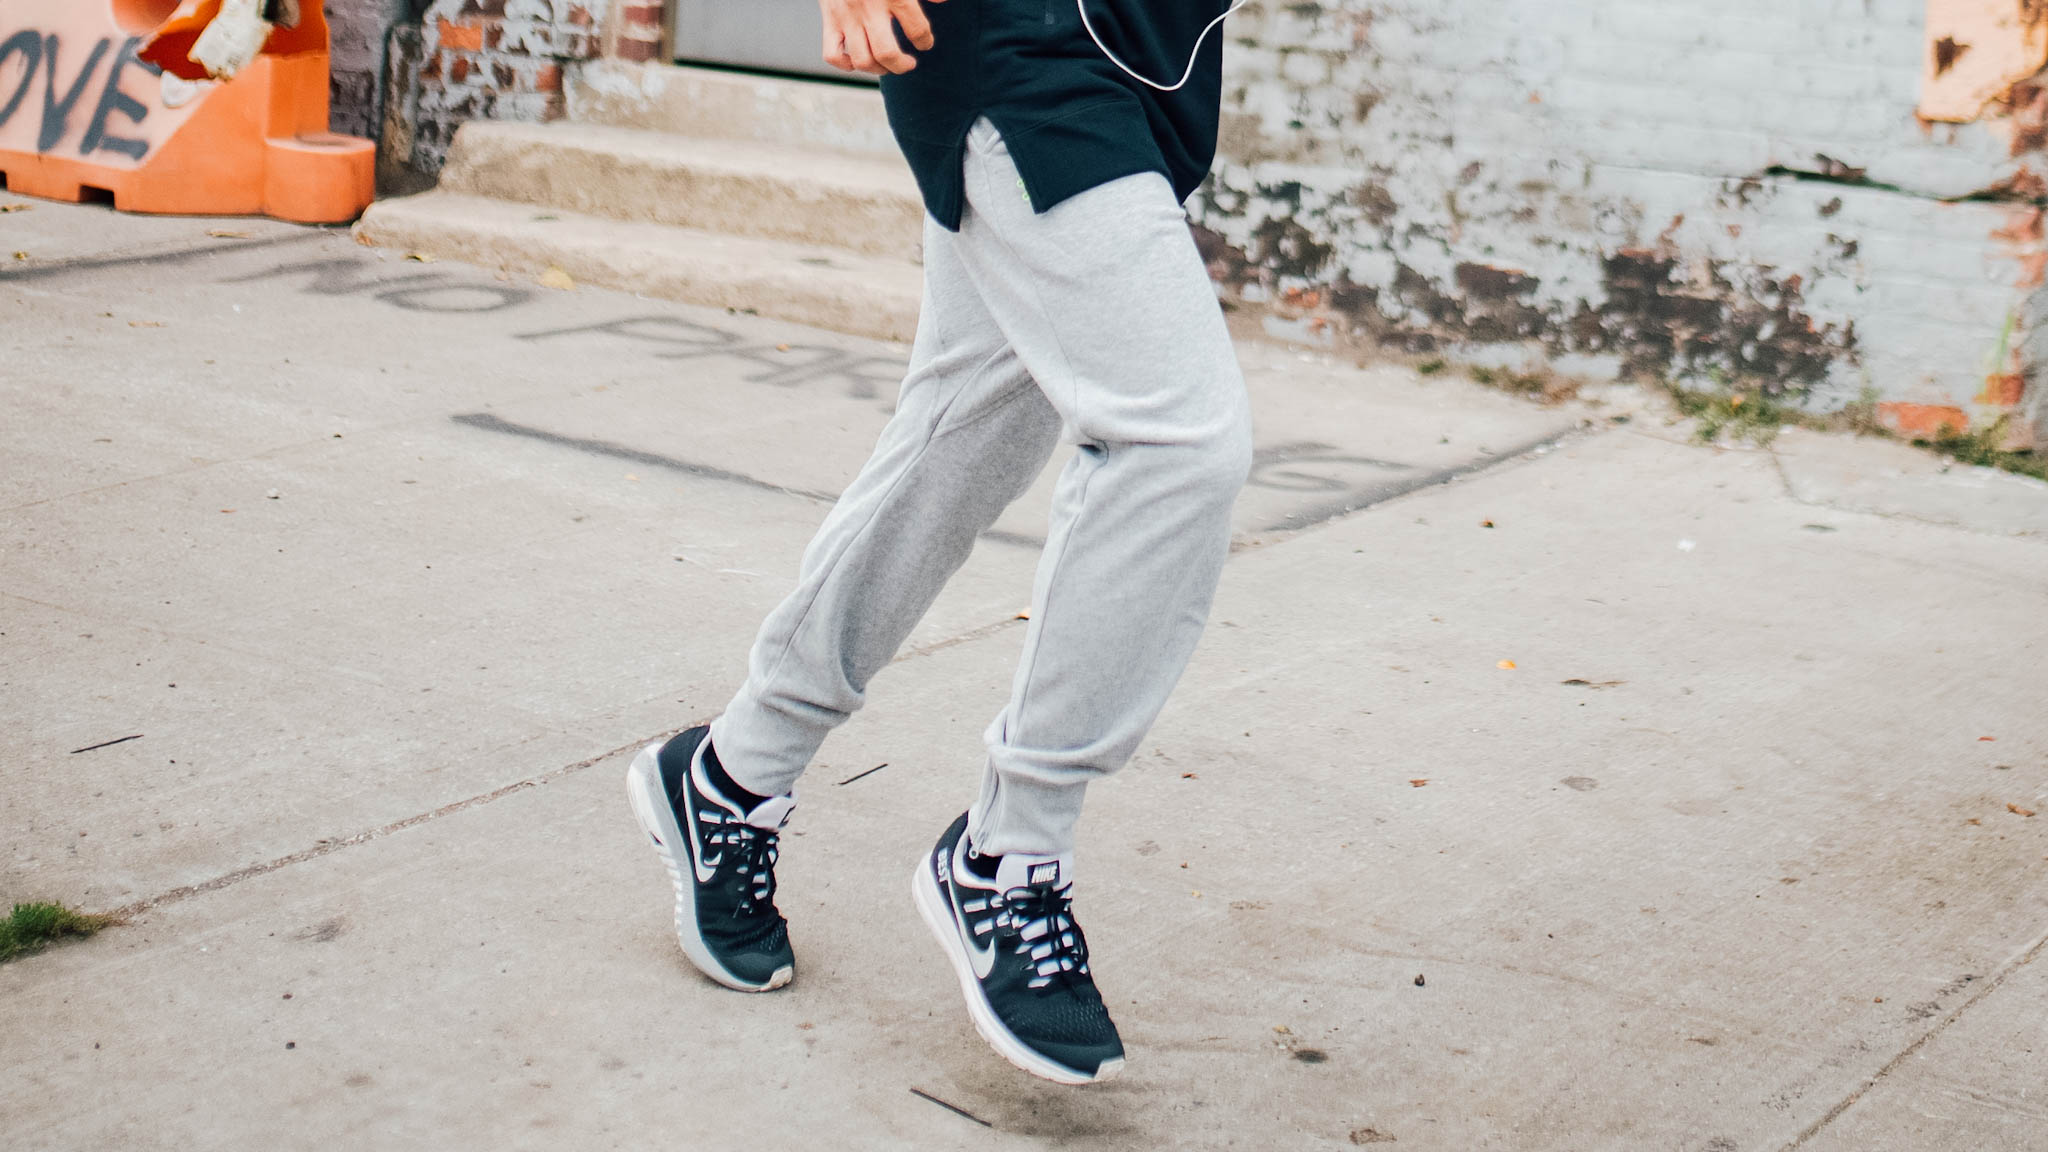 man in gym clothes squatting - man in running clothes - man wearing grey joggers - grey sweat pants - black hoodie - black Nike sneakers - man running